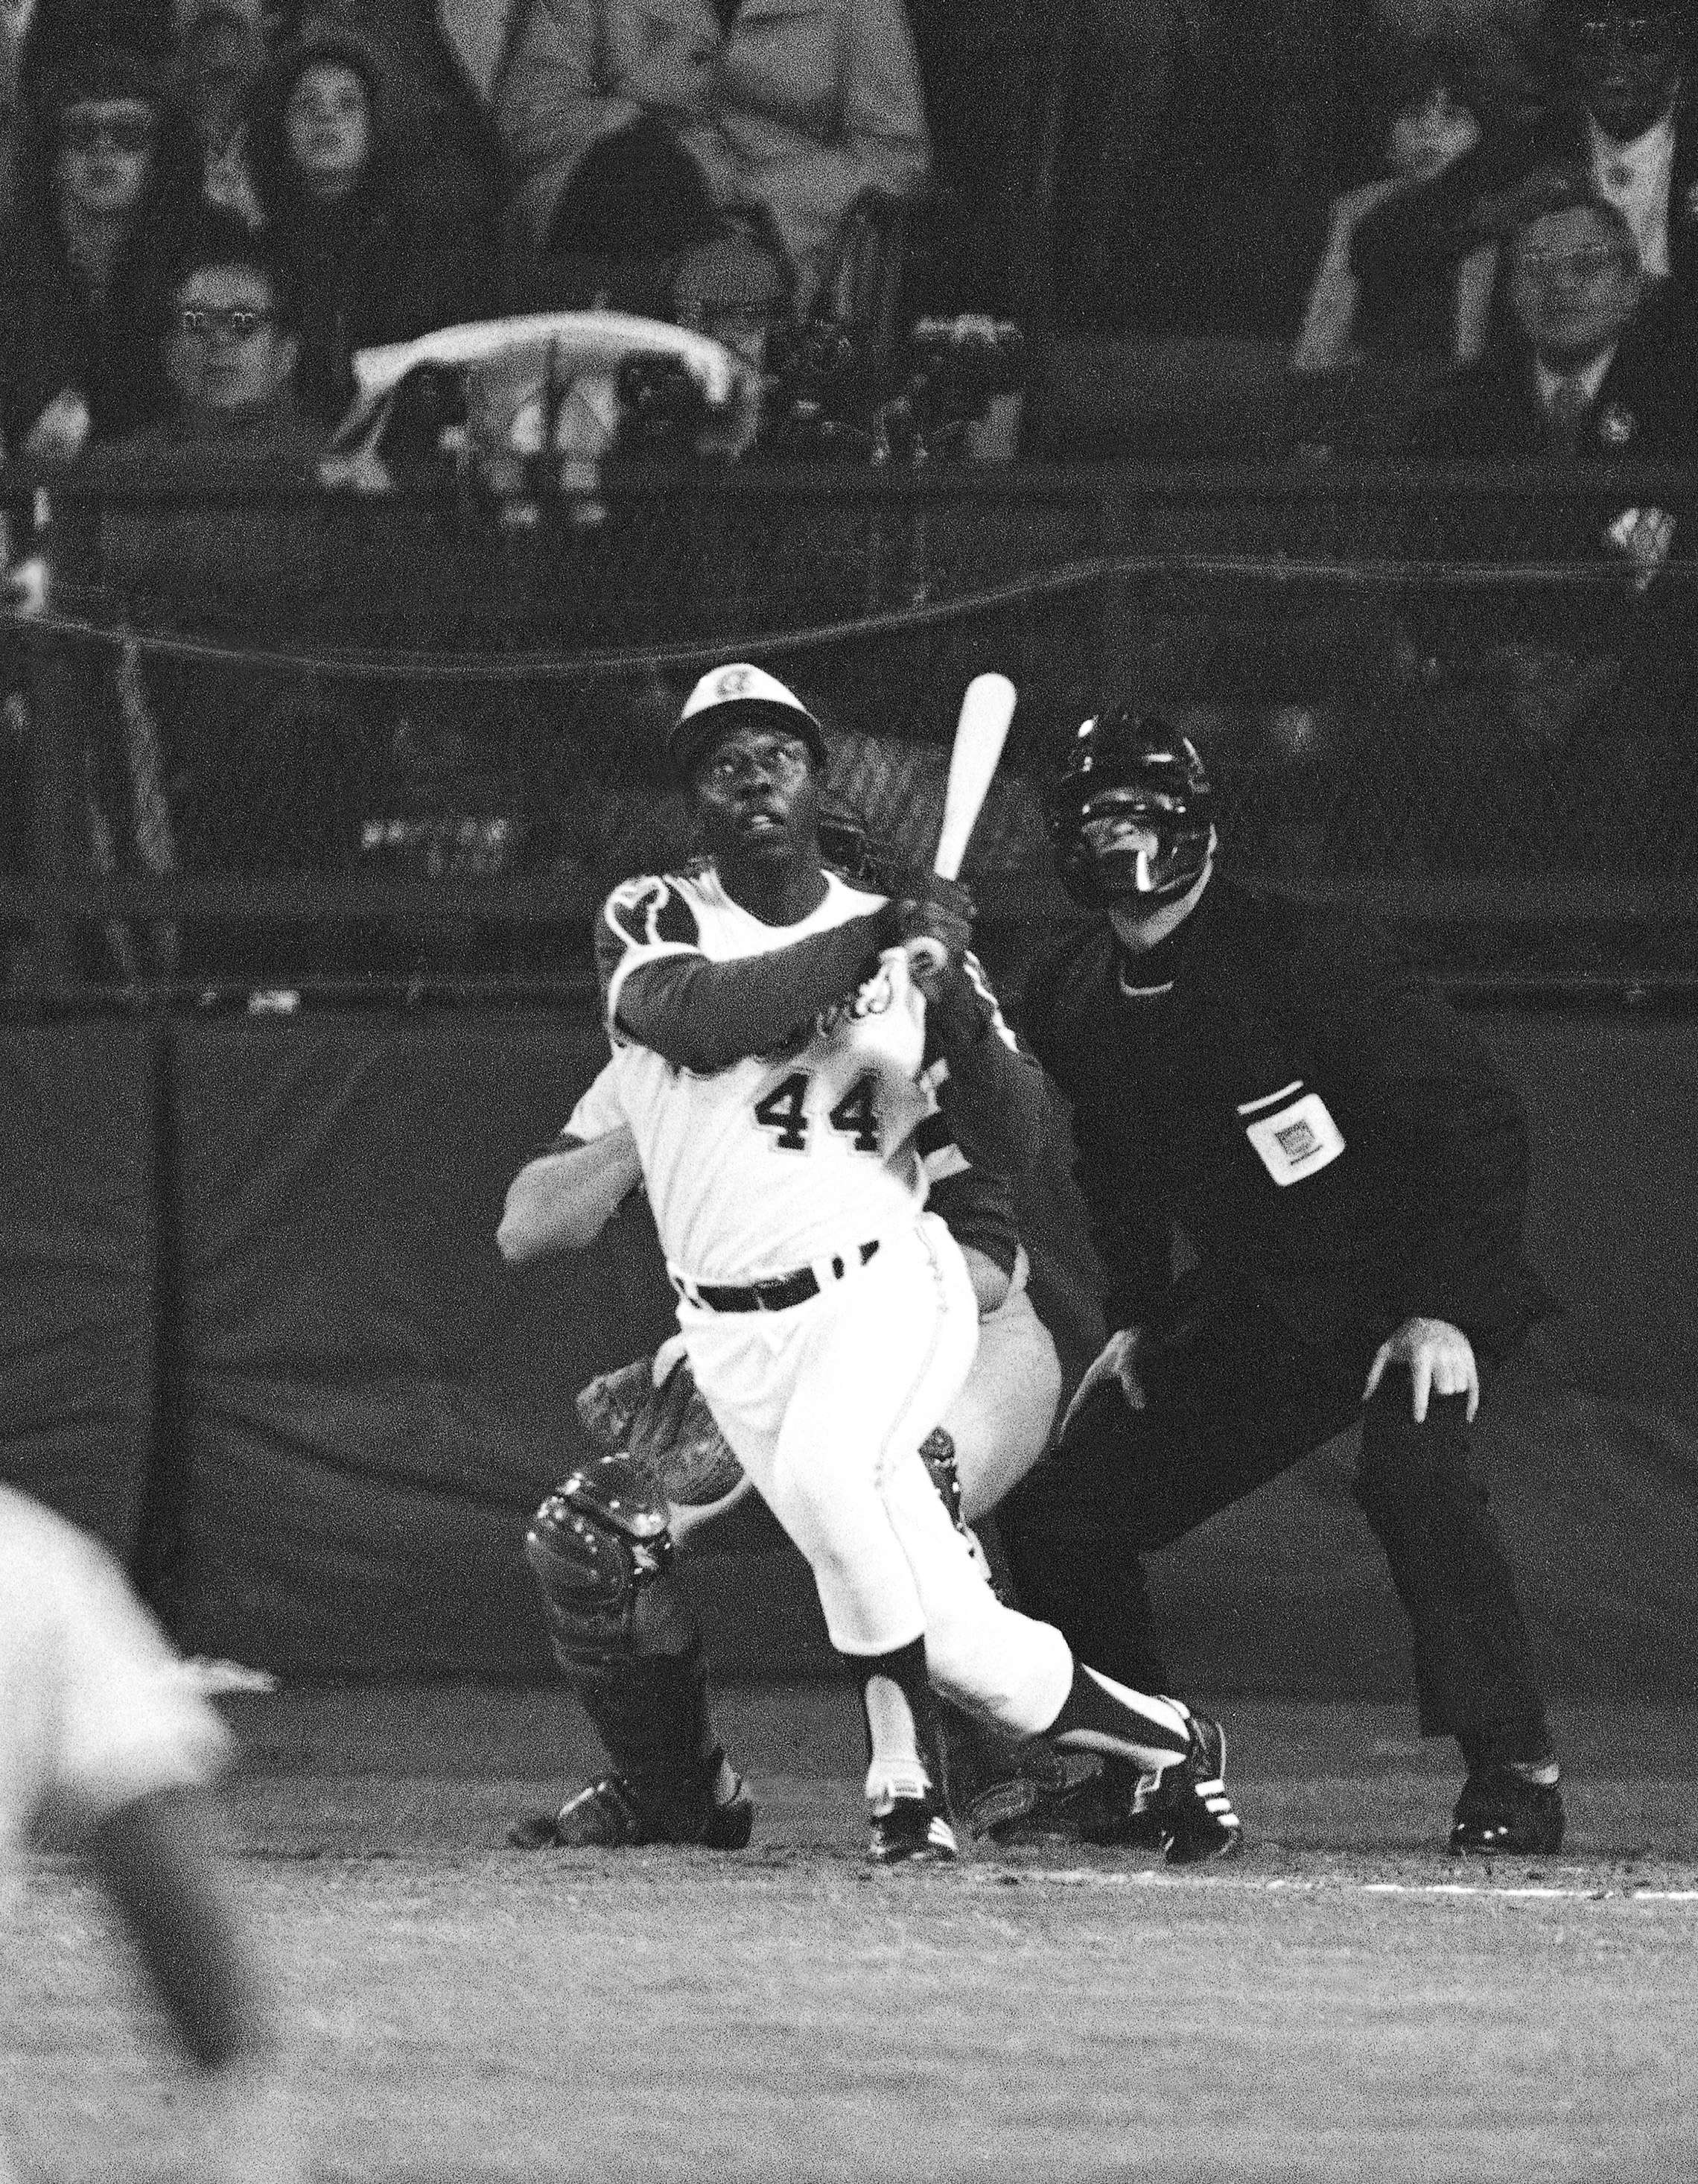 April 8, 1974: Hank Aaron watches his 715th career home run sail over the outfield fence, breaking the record set by Babe Ruth in 1935.